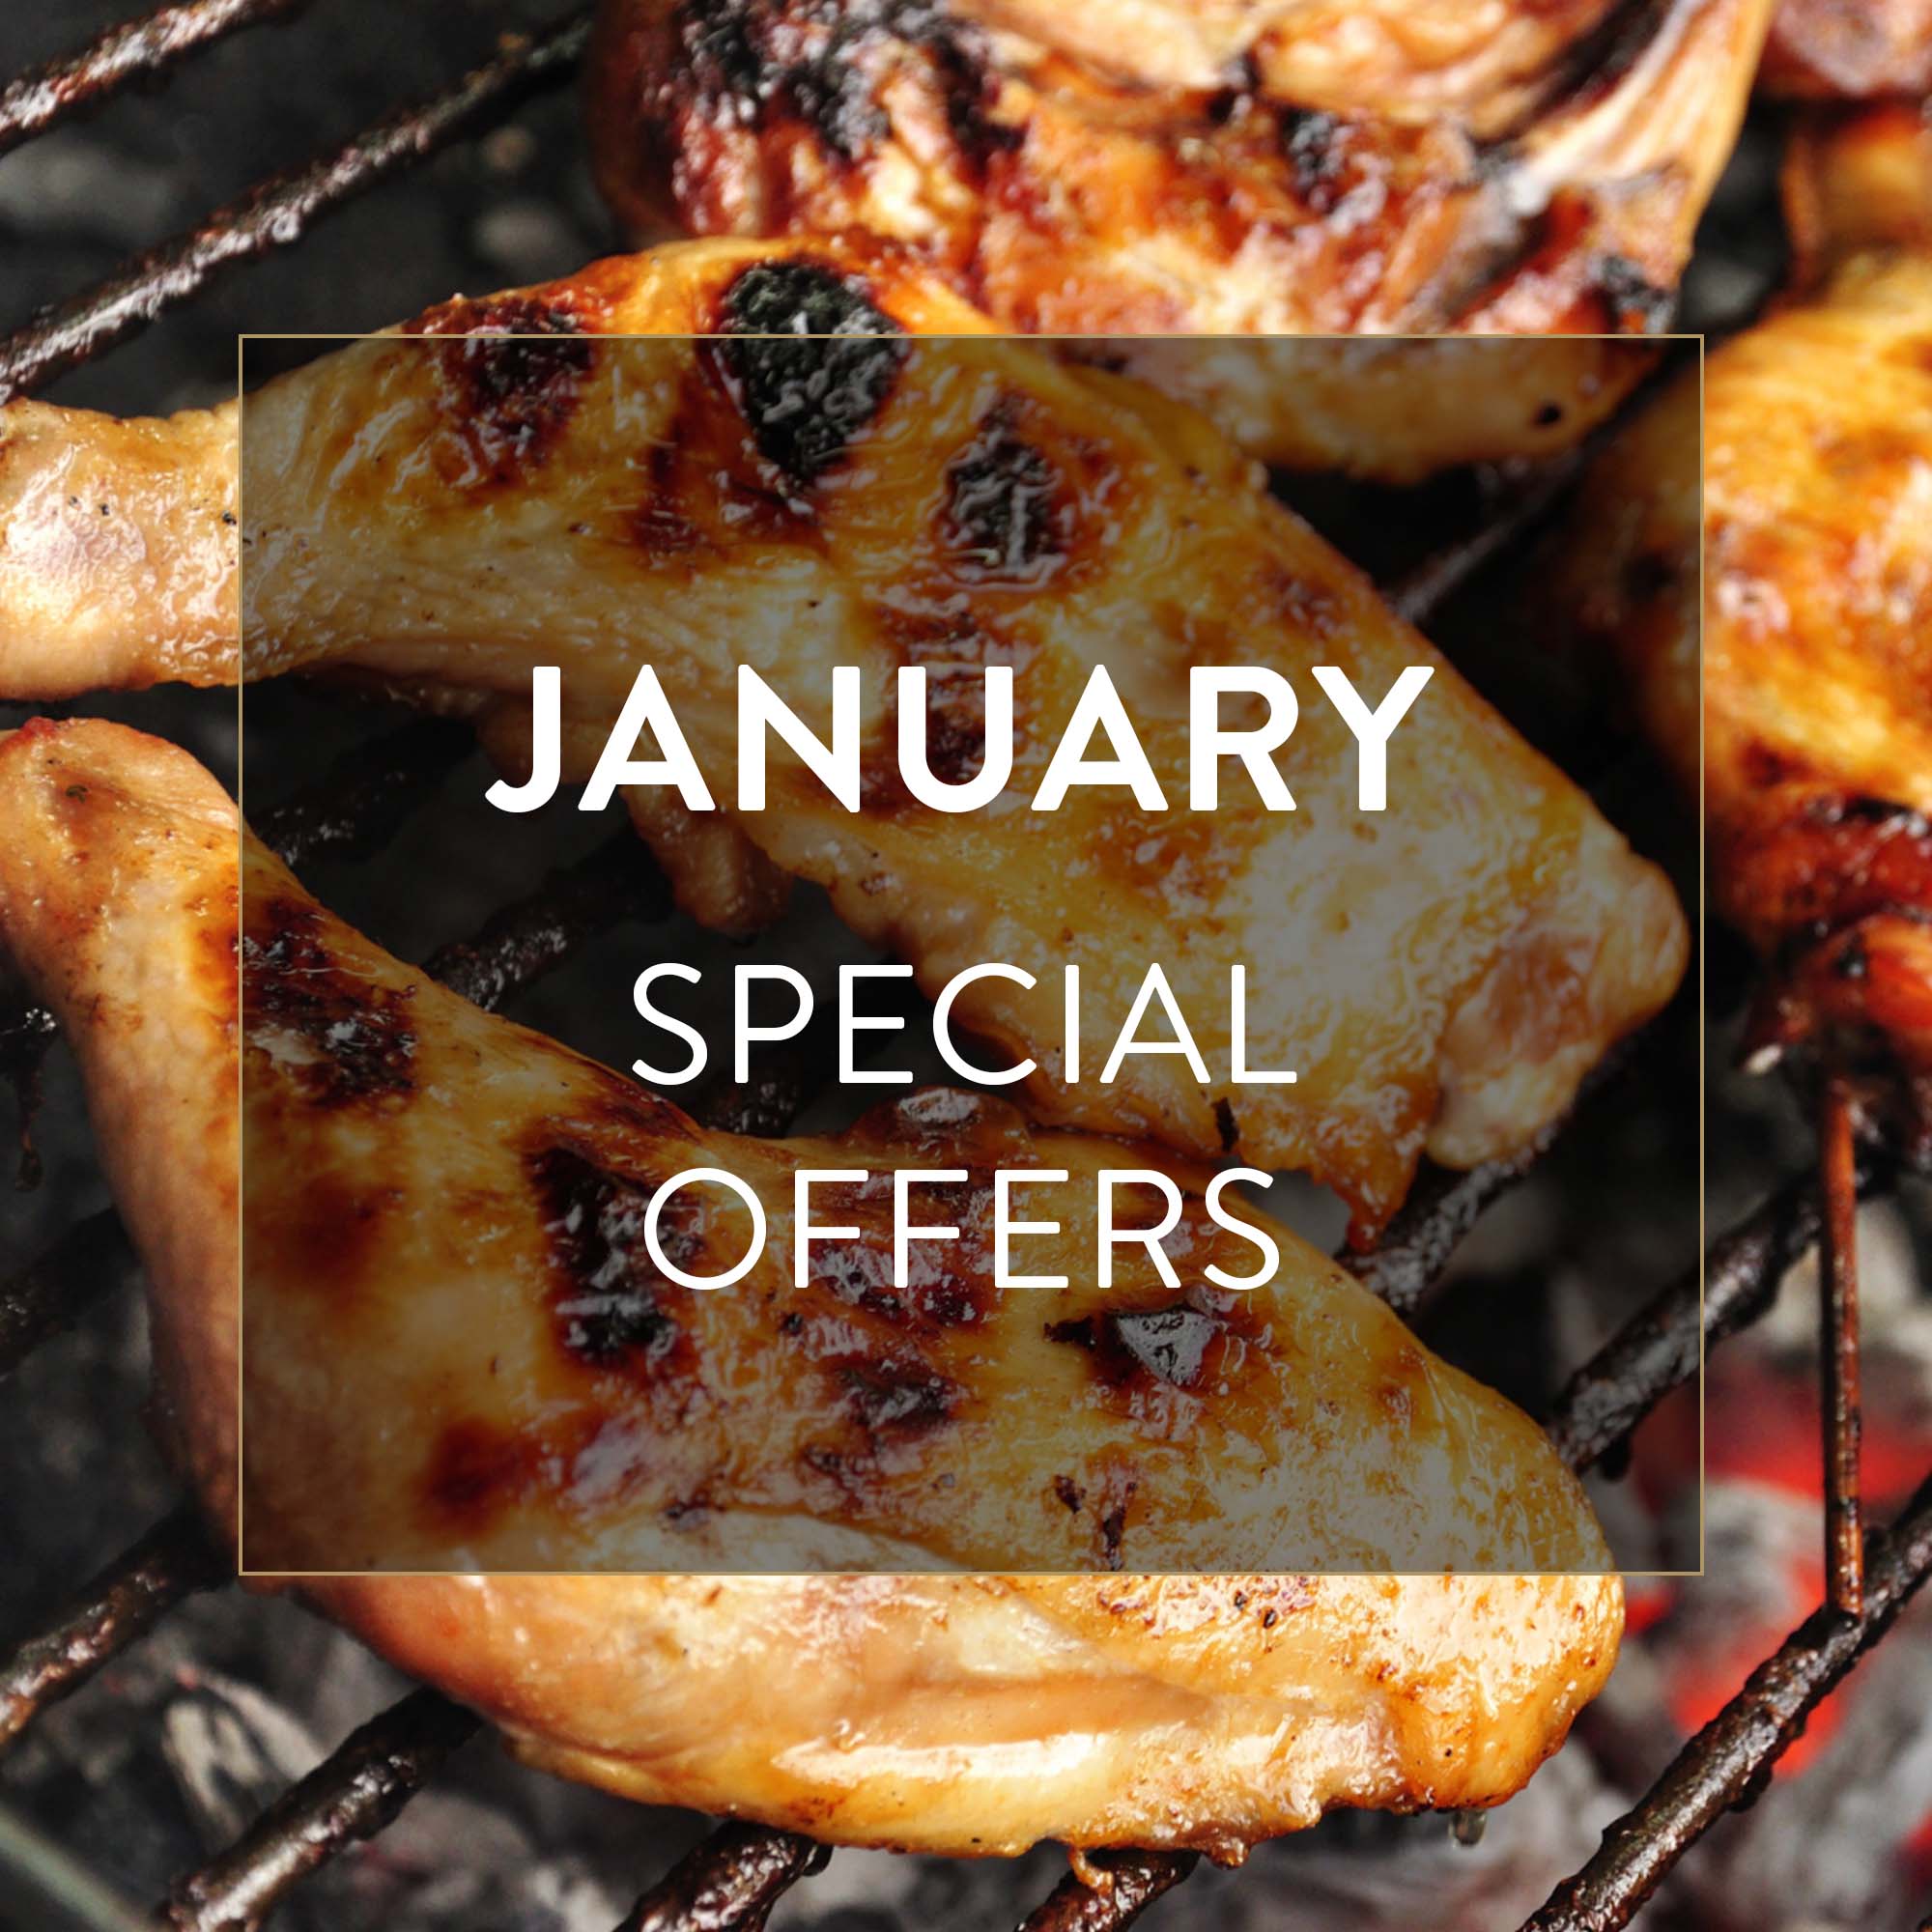 January special offers